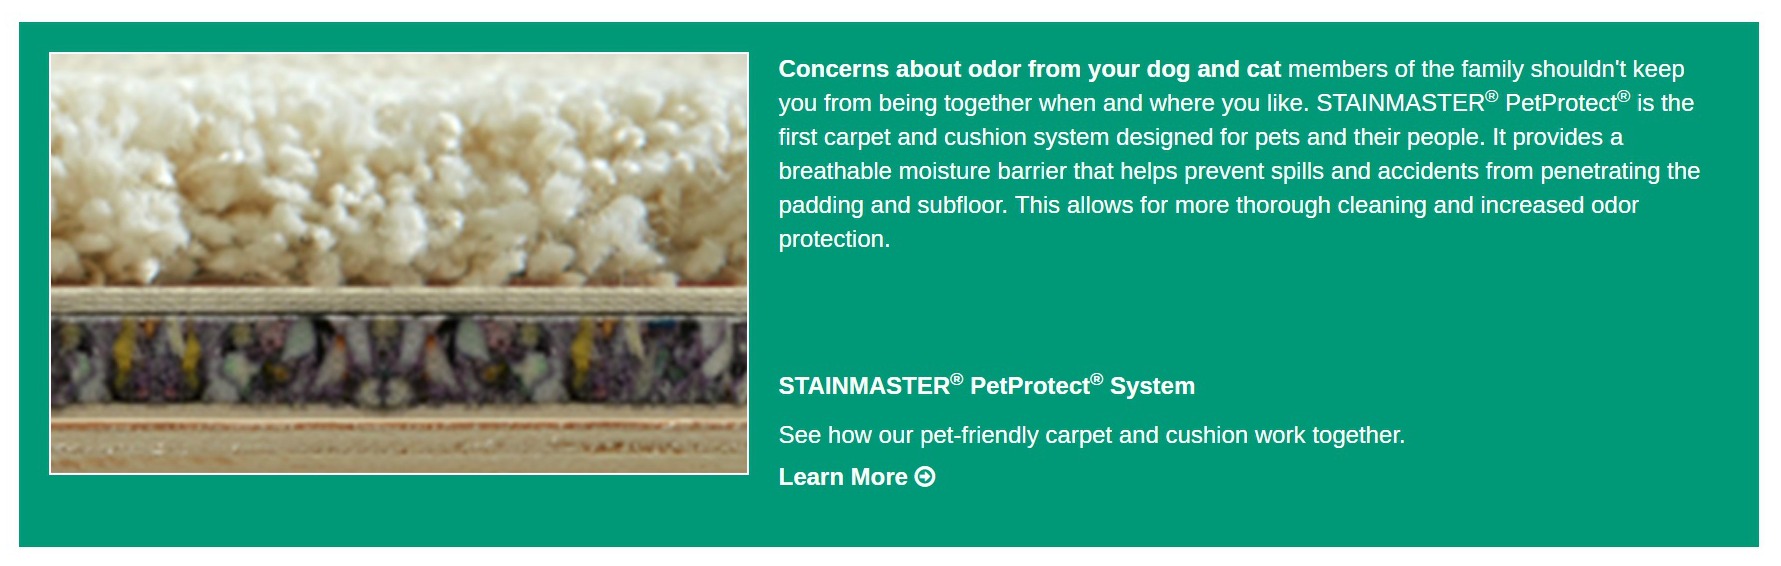 Flooring America Stainmater PetProtect Carpet Information and Sale - sponsored pin